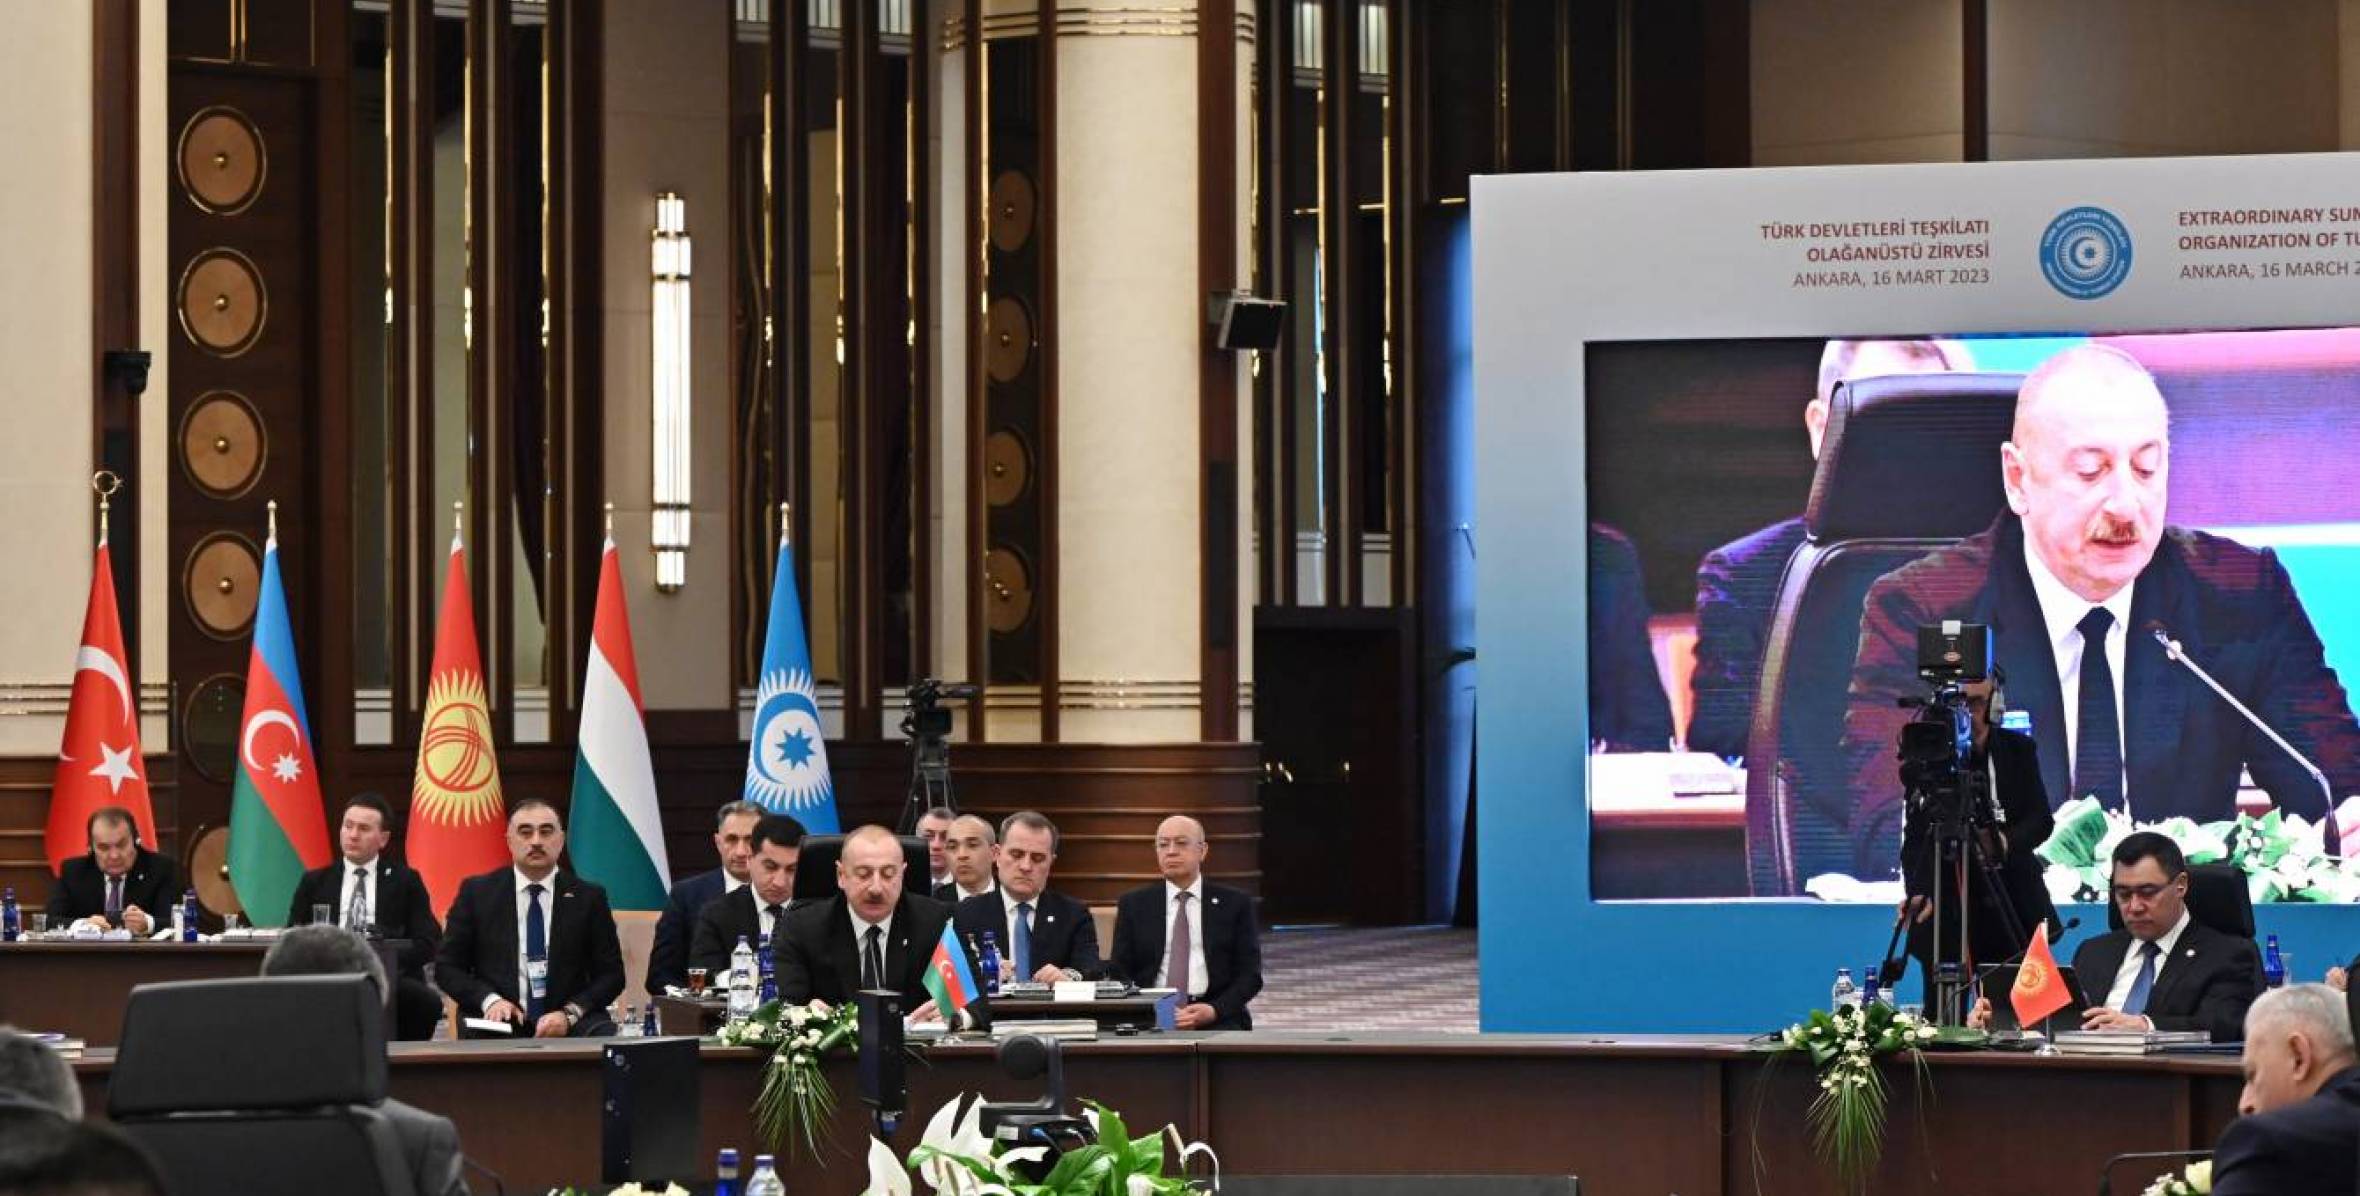 Speech by Ilham Aliyev at the Extraordinary Summit of Heads of State of Organization of Turkic States